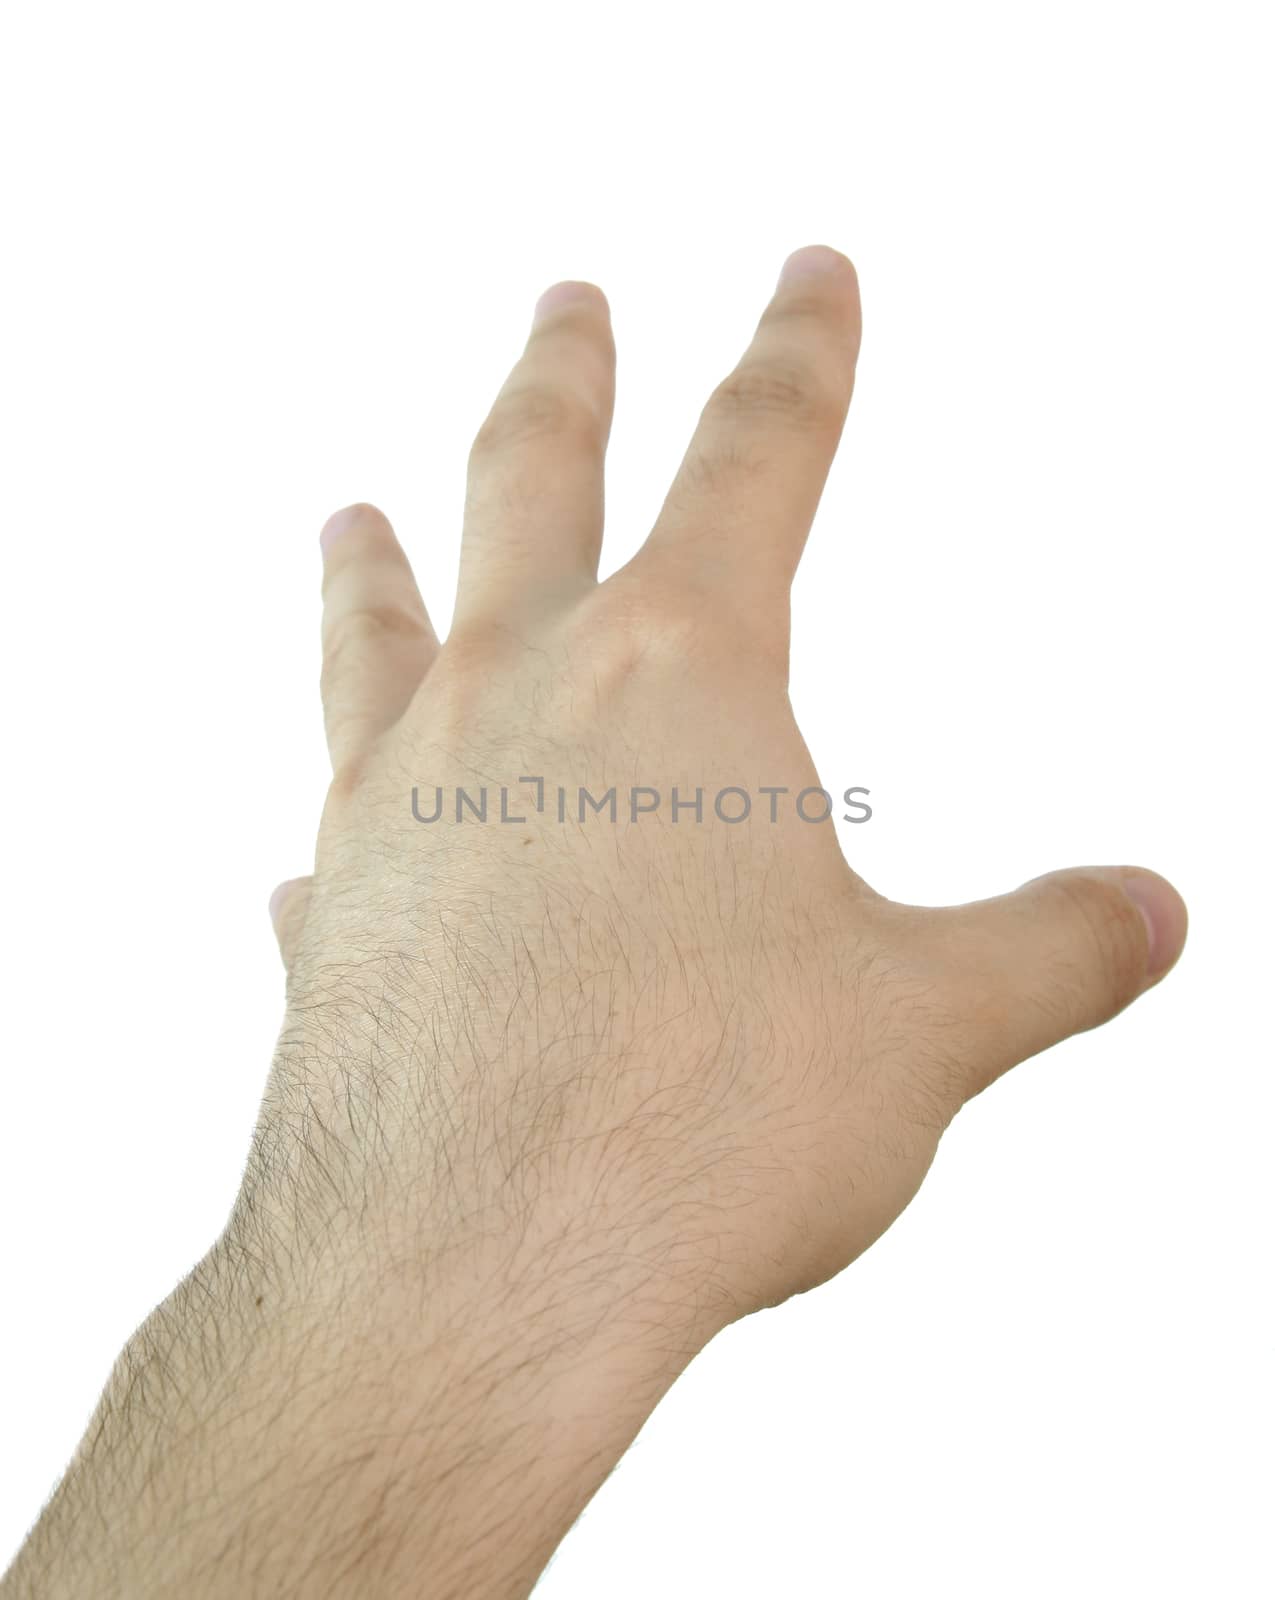 Man hand isolated on white background. Close up.